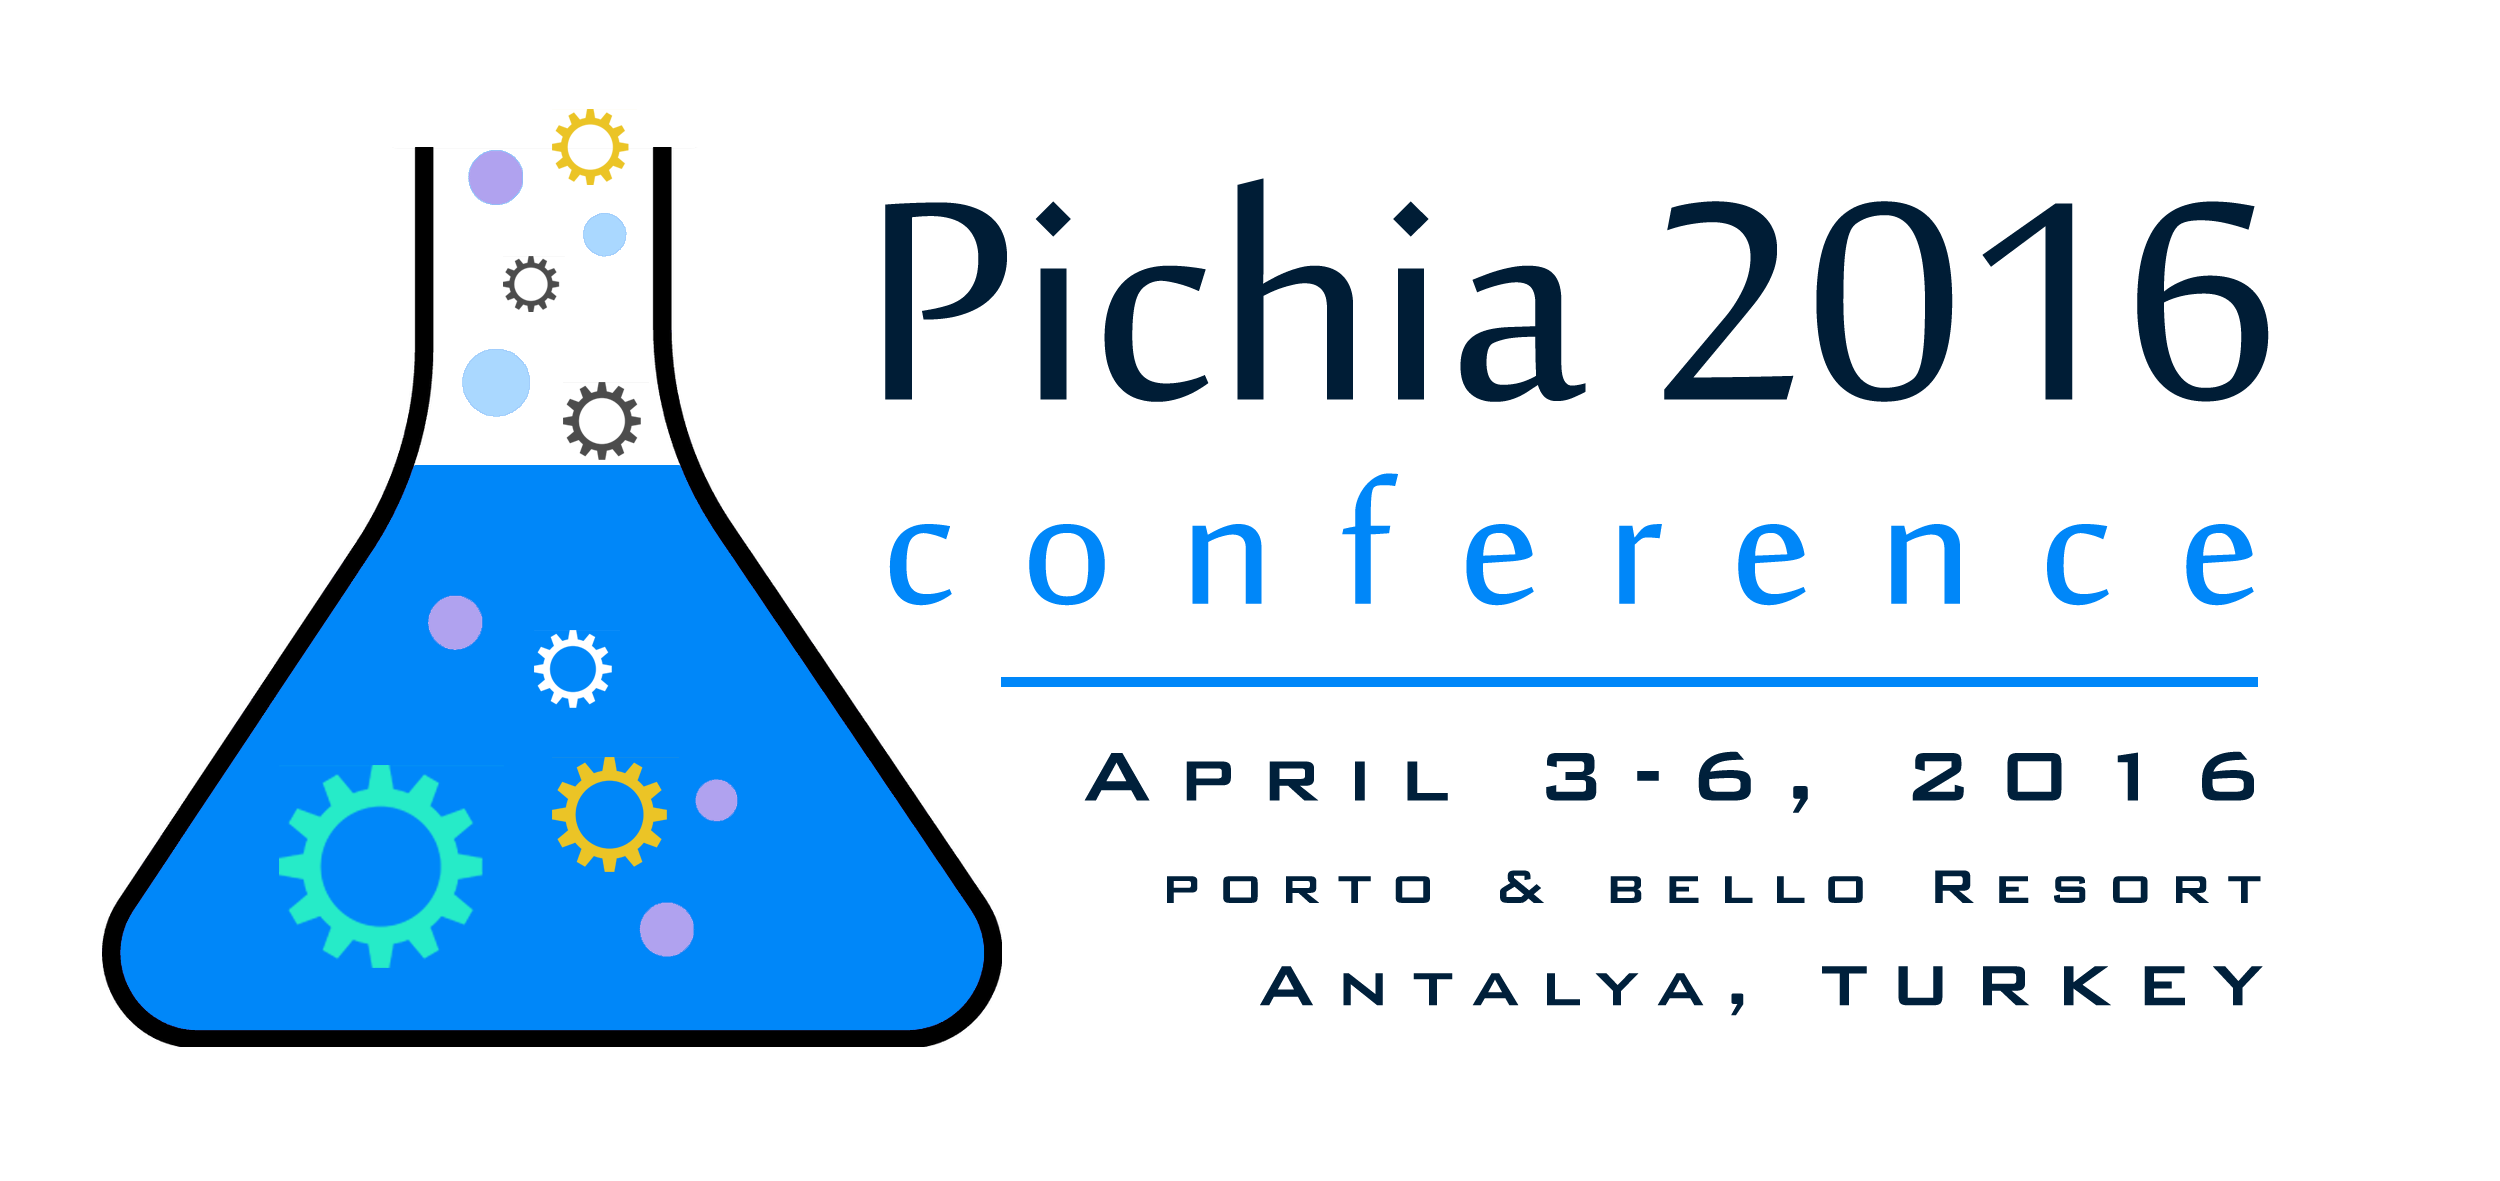 Pichia 2016 is an improving
useful conference to discuss latest Pichia developments.

Attendees at the Conference will learn how this extraordinary system has progressed over the last 30 years, producing an ever-expanding variety of novel proteins. Speakers and poster sessions will discuss the latest Pichia developments for post-translational modification, process development and the application of genome insights to improvements in productivity, and give you a head start for your future uses. Pichia research has lead to more than 70 commercial products, 2 approved therapeutics and more than 5000 proteins expressed.